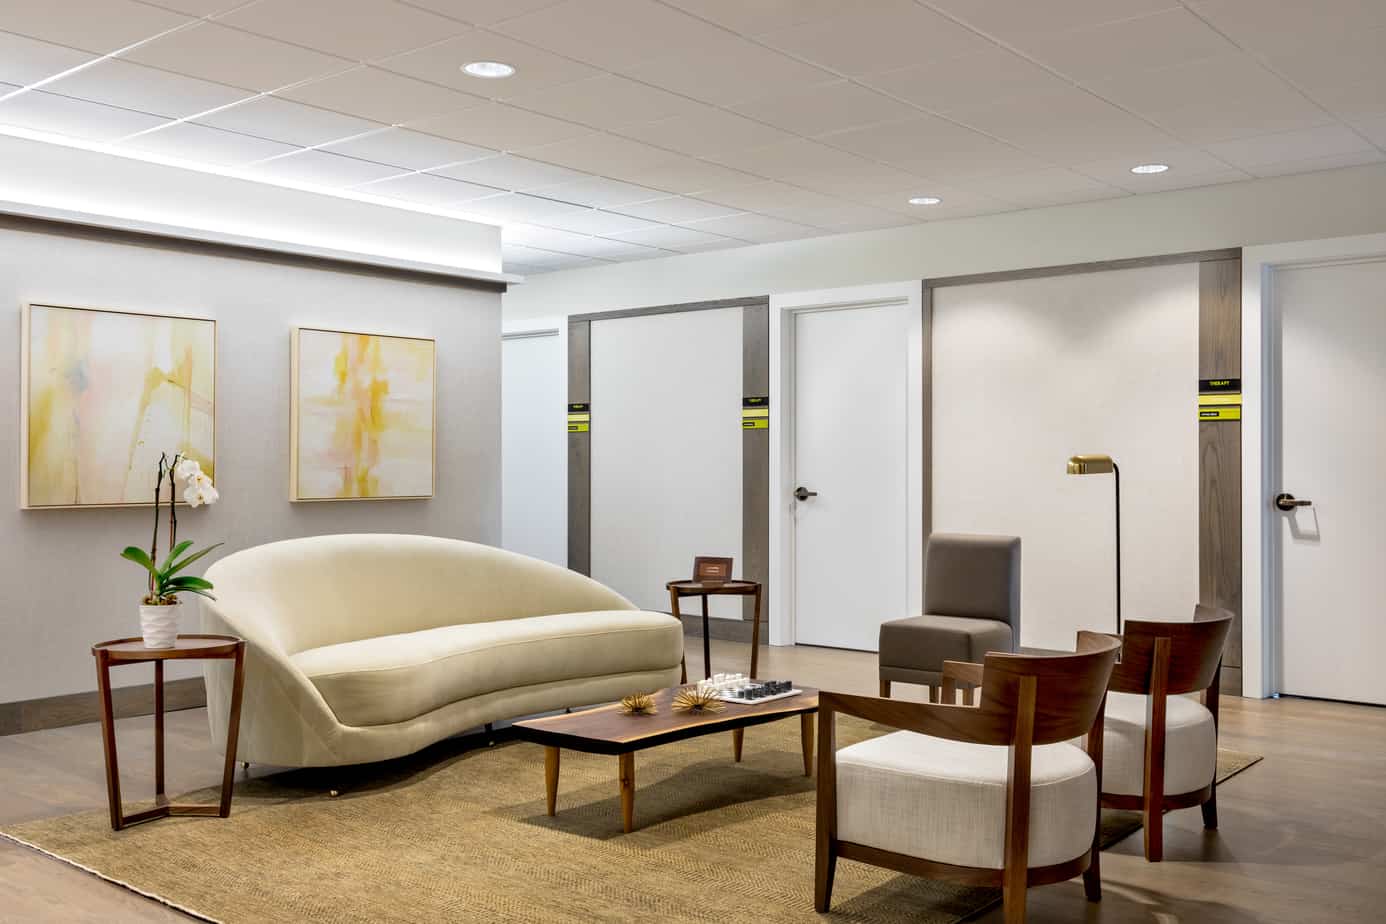 Light bright reception area with modern furniture at Mountainside treatment center in Chappaqua.